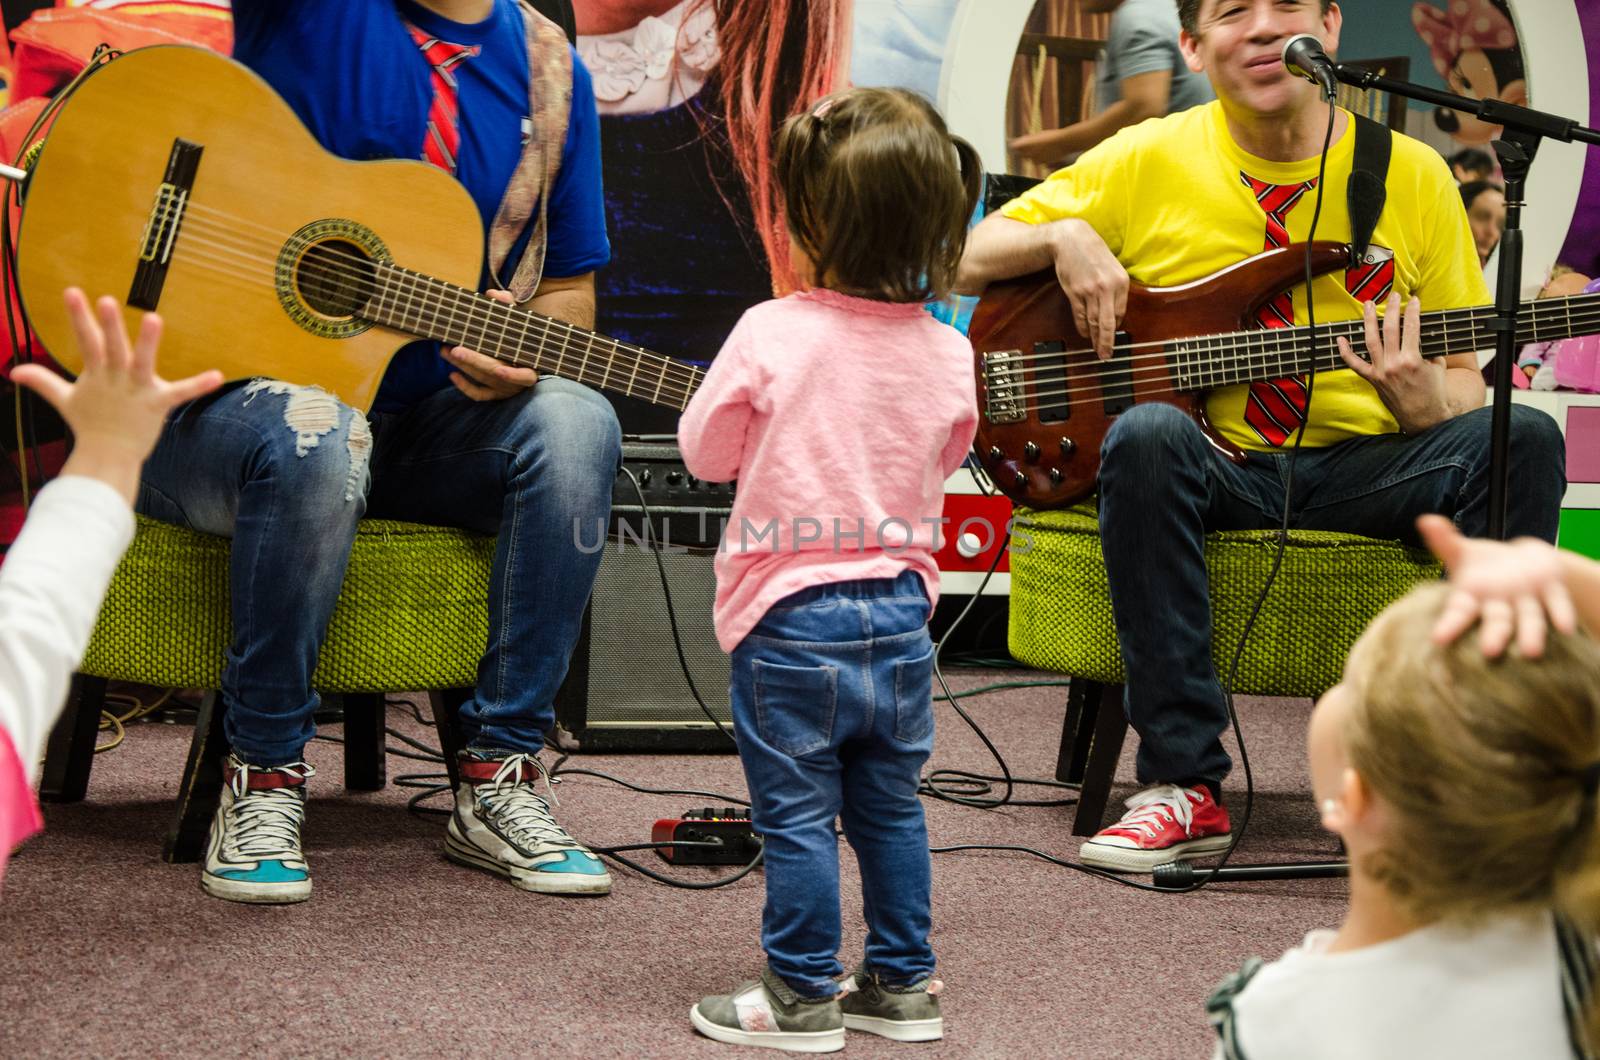 Musical Band for children Troly and El Lobito, the guys singing to childrem